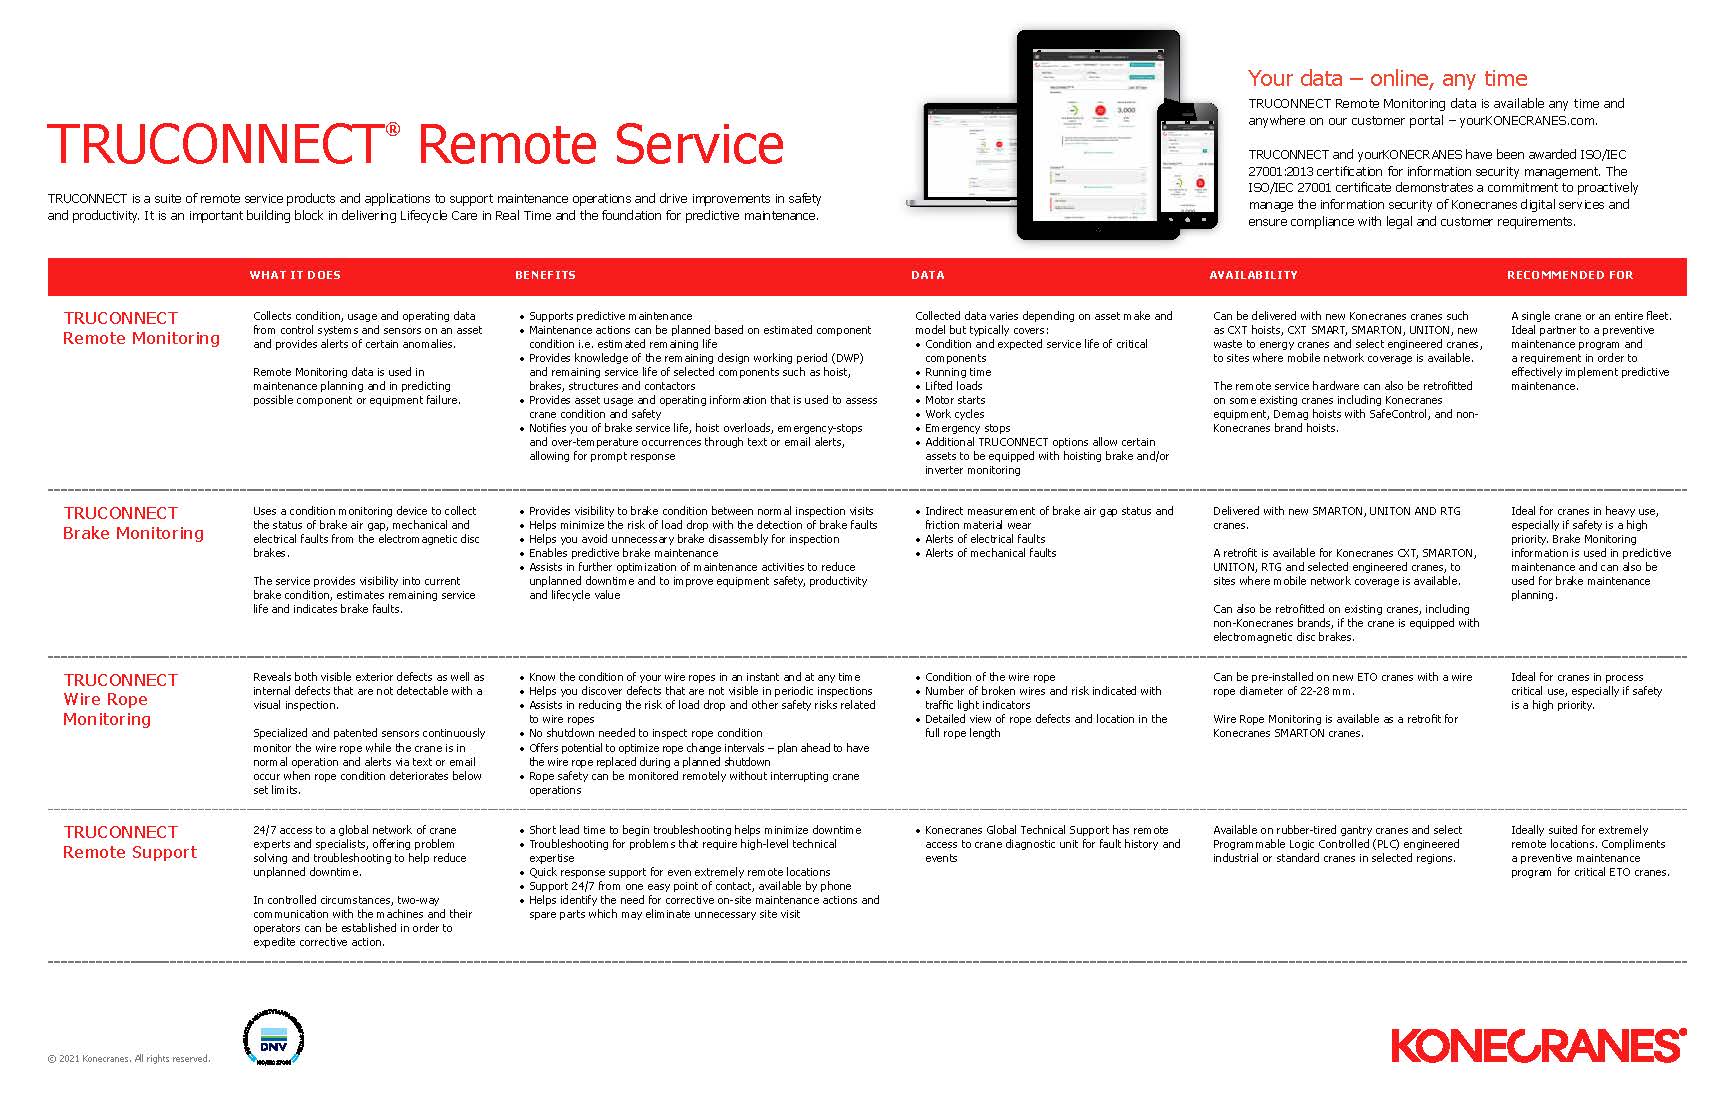 TRUCONNECT Remote Service product chart